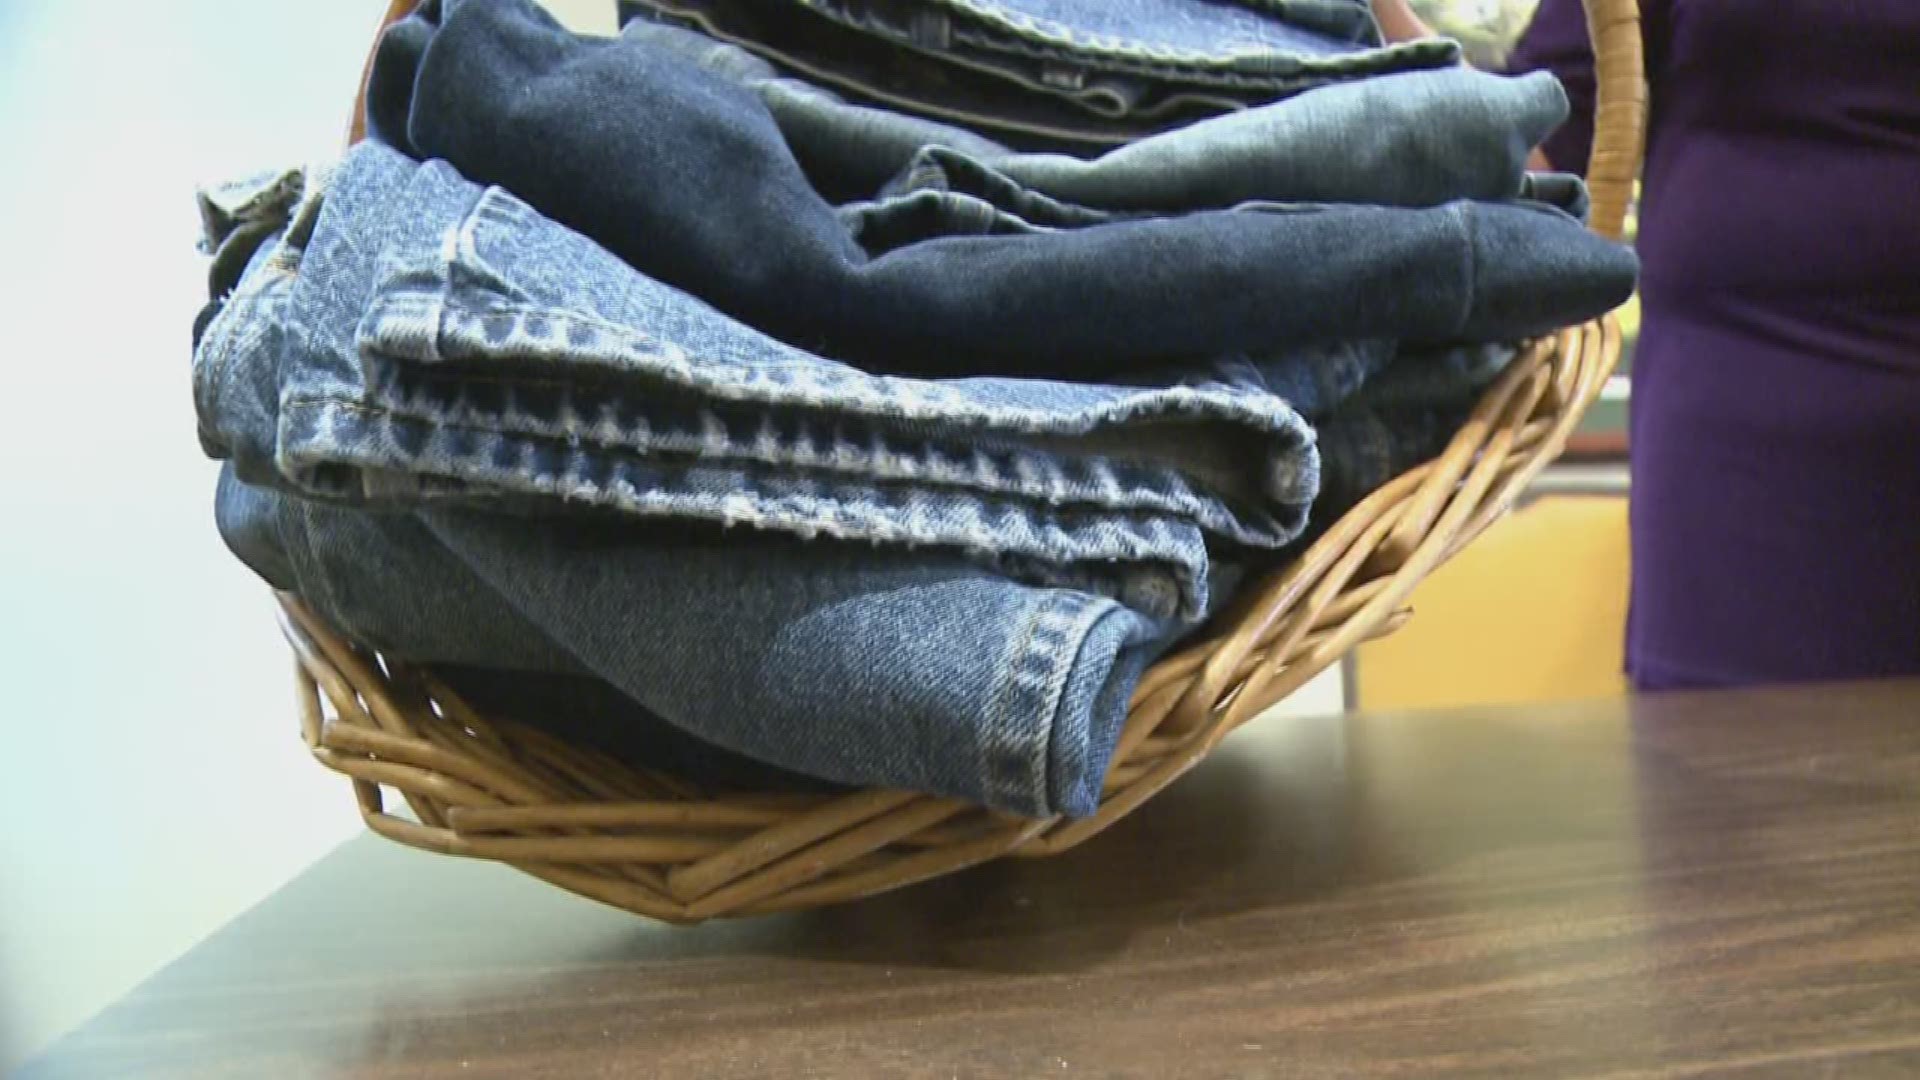 A Hot Springs Village woman is hoping to make a difference in veterans’ lives, one pair of jeans at a time.